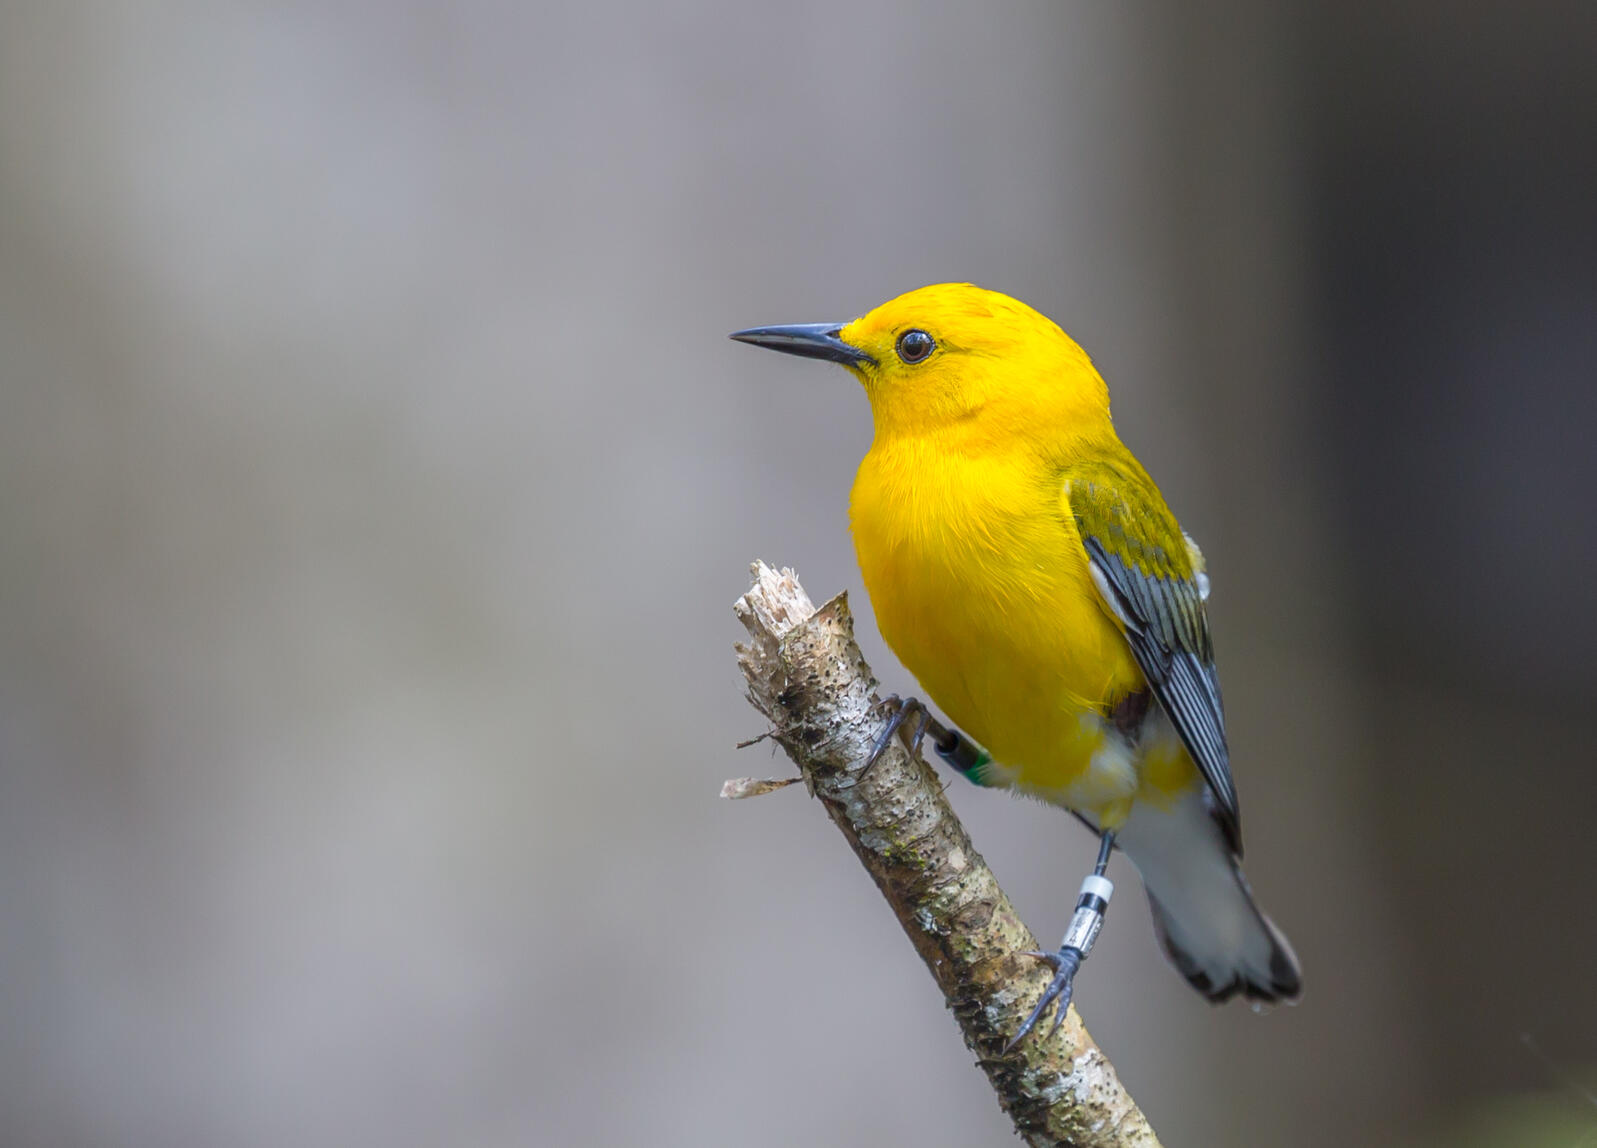 A yellow bird with colored bands on legs is perched on a cypress knee in a gray-like swampy background